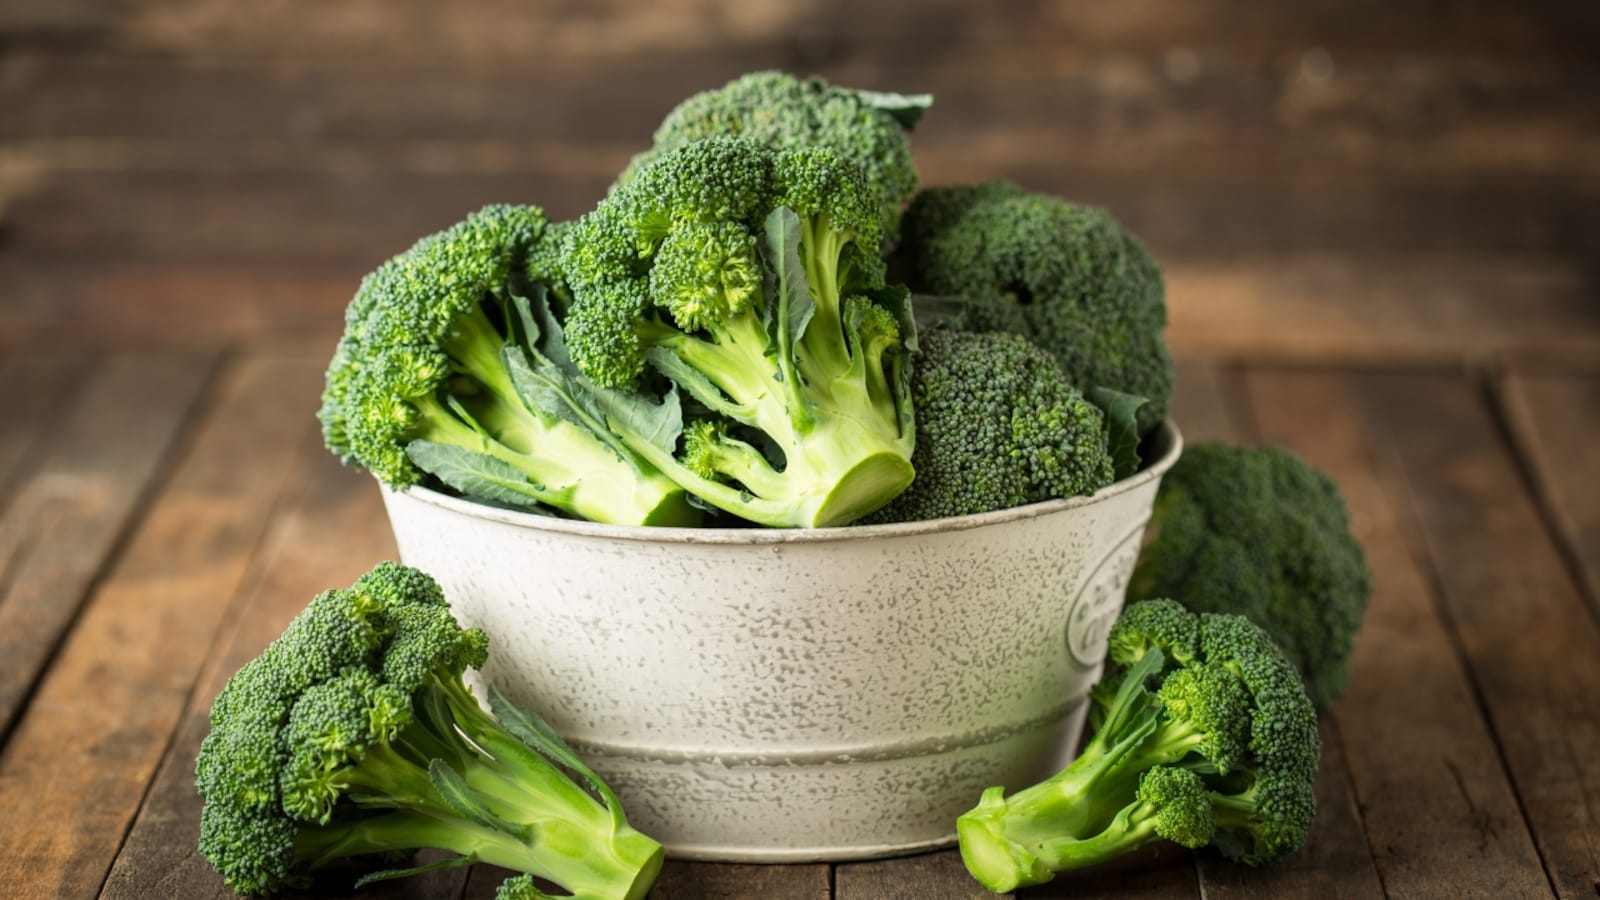 Health benefits of eating broccoli: It is not just a vegetable, but a powerhouse of health